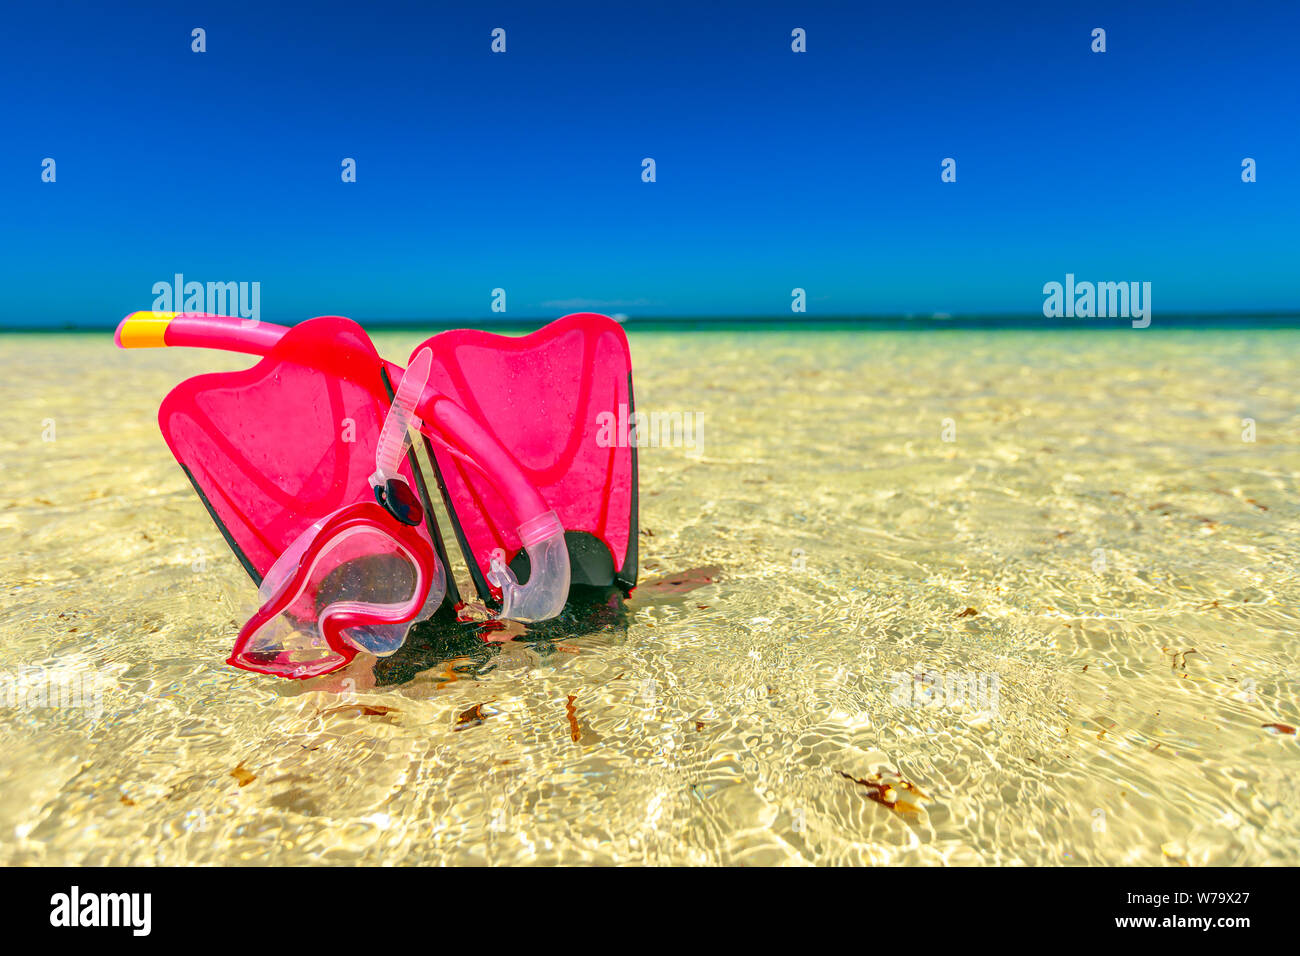 Summer equipment for snorkeling. Scuba mask with fins in pink color on the water. Hangover Bay in Nambung National Park, Western Australia. Blue sky Stock Photo